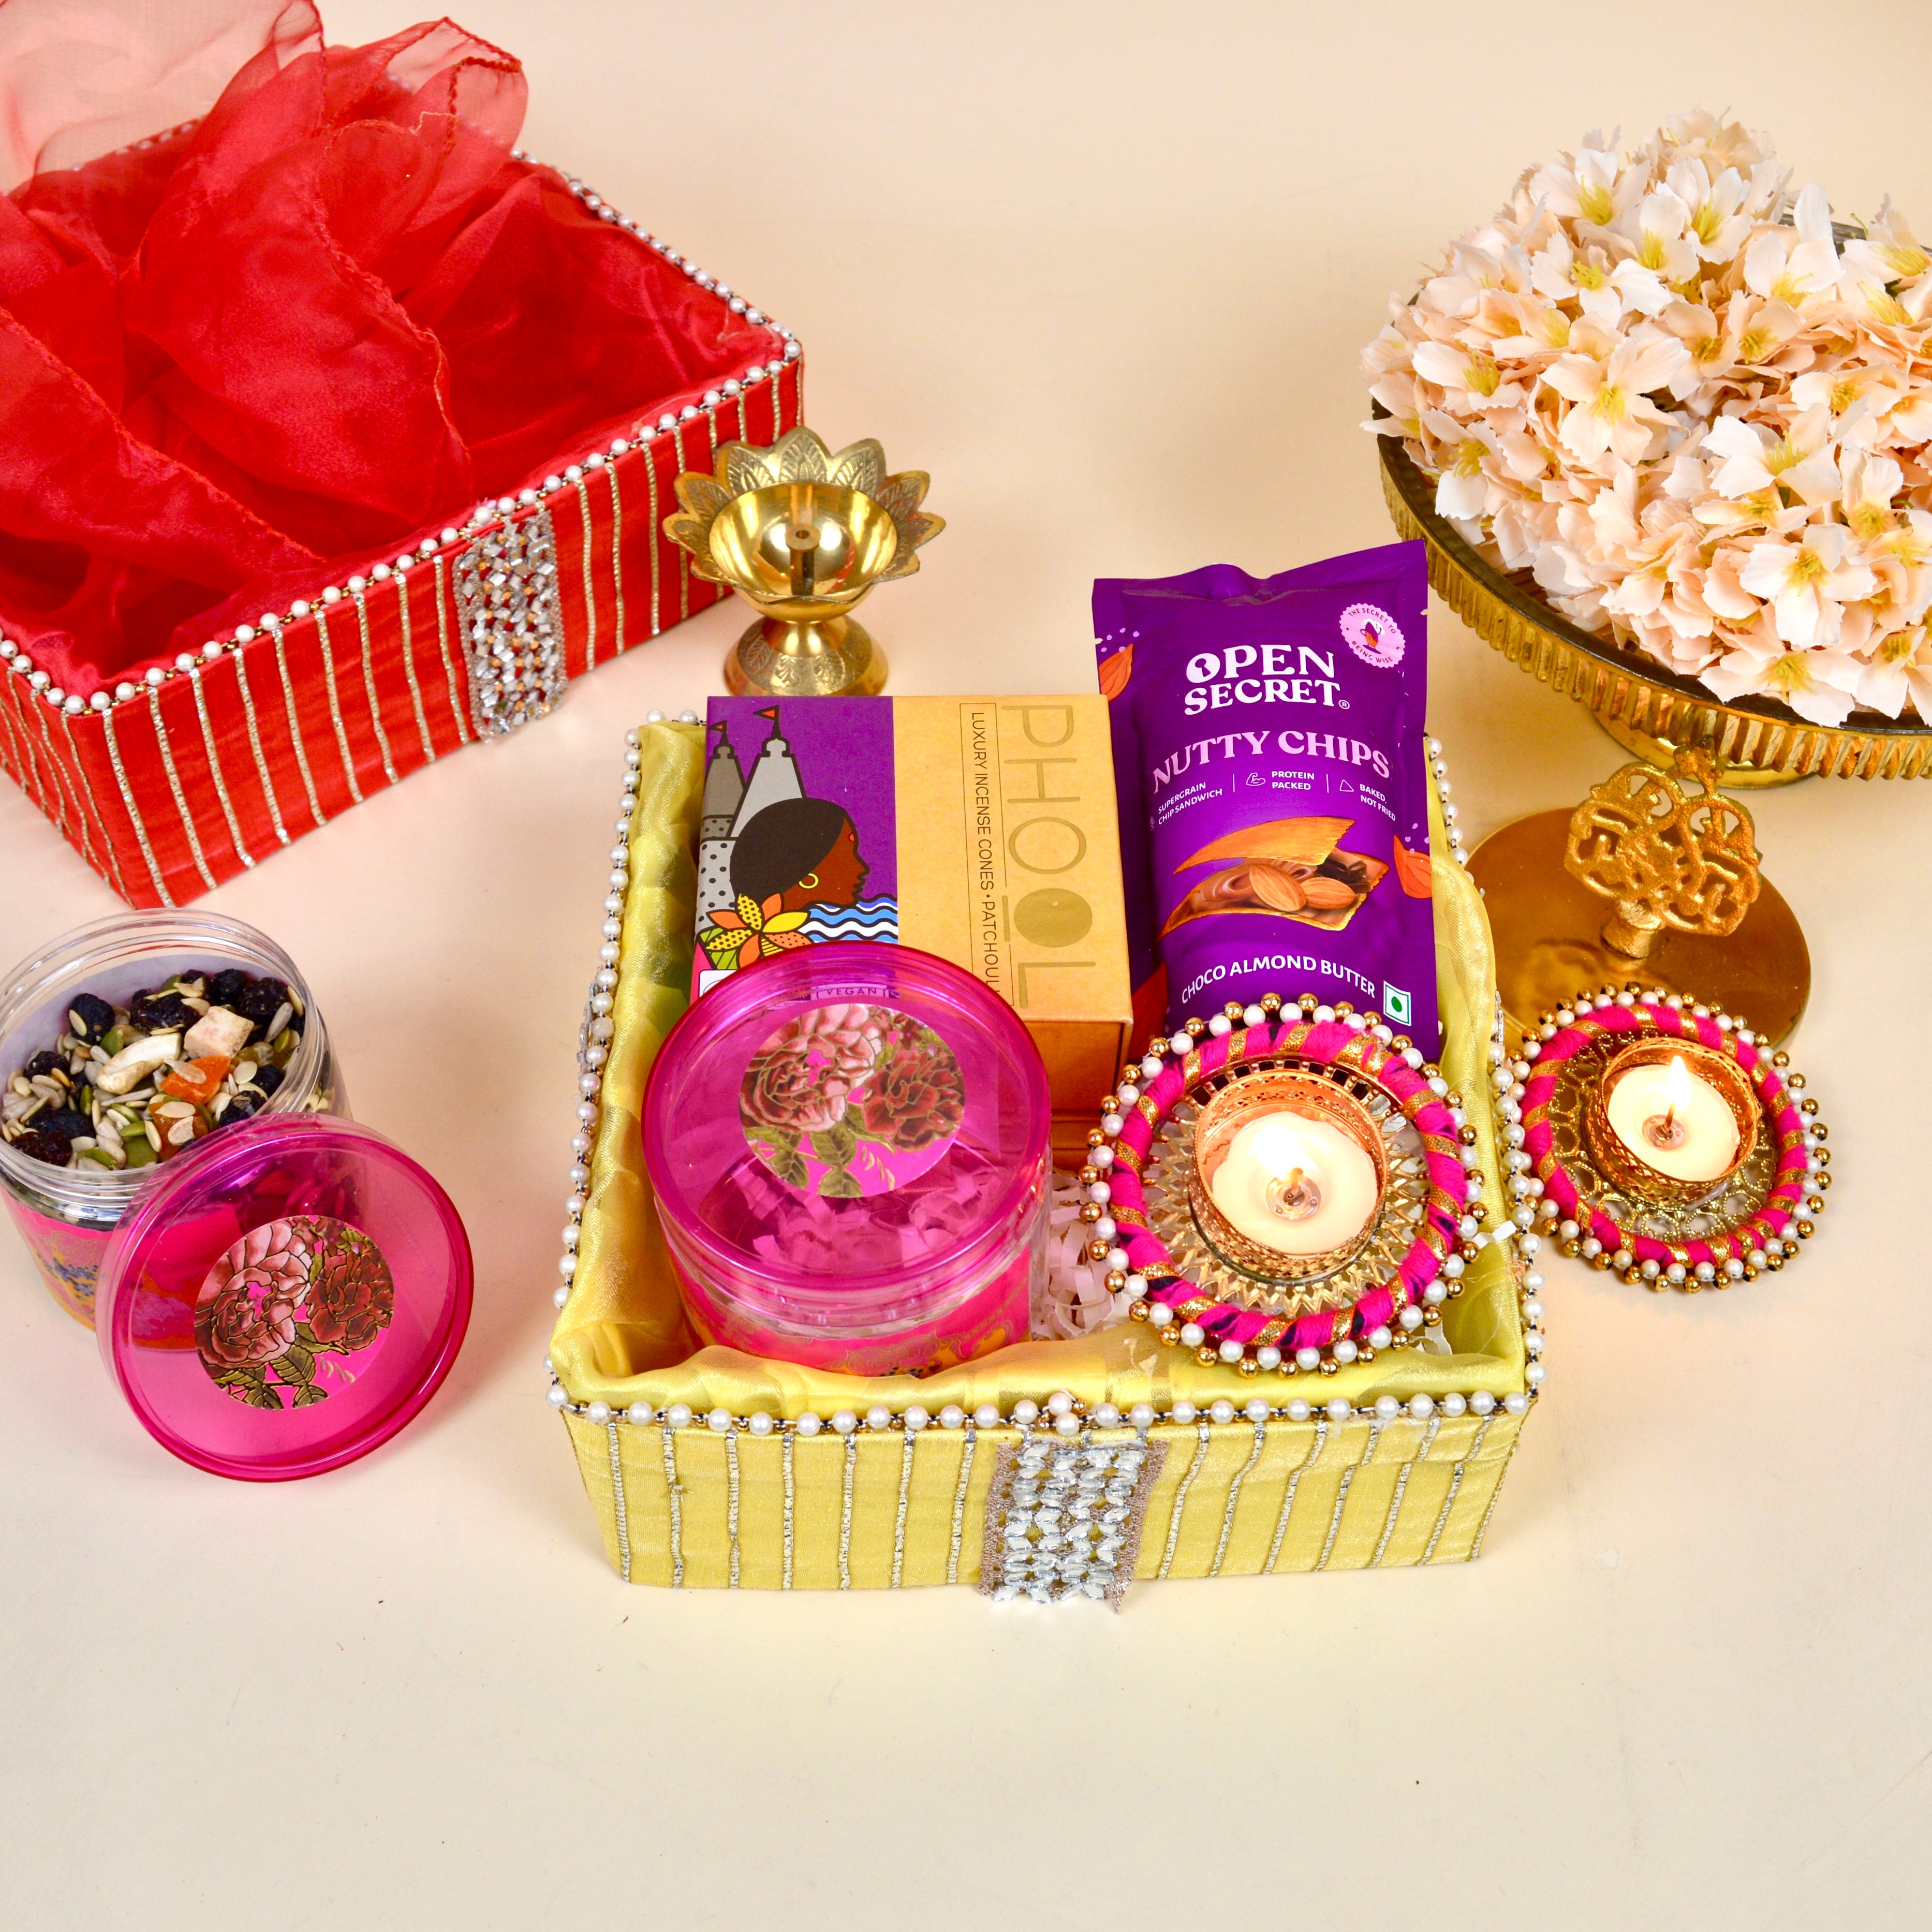 Top 5 Unique Diwali Gifts for Your Family, Friends, and Everyone